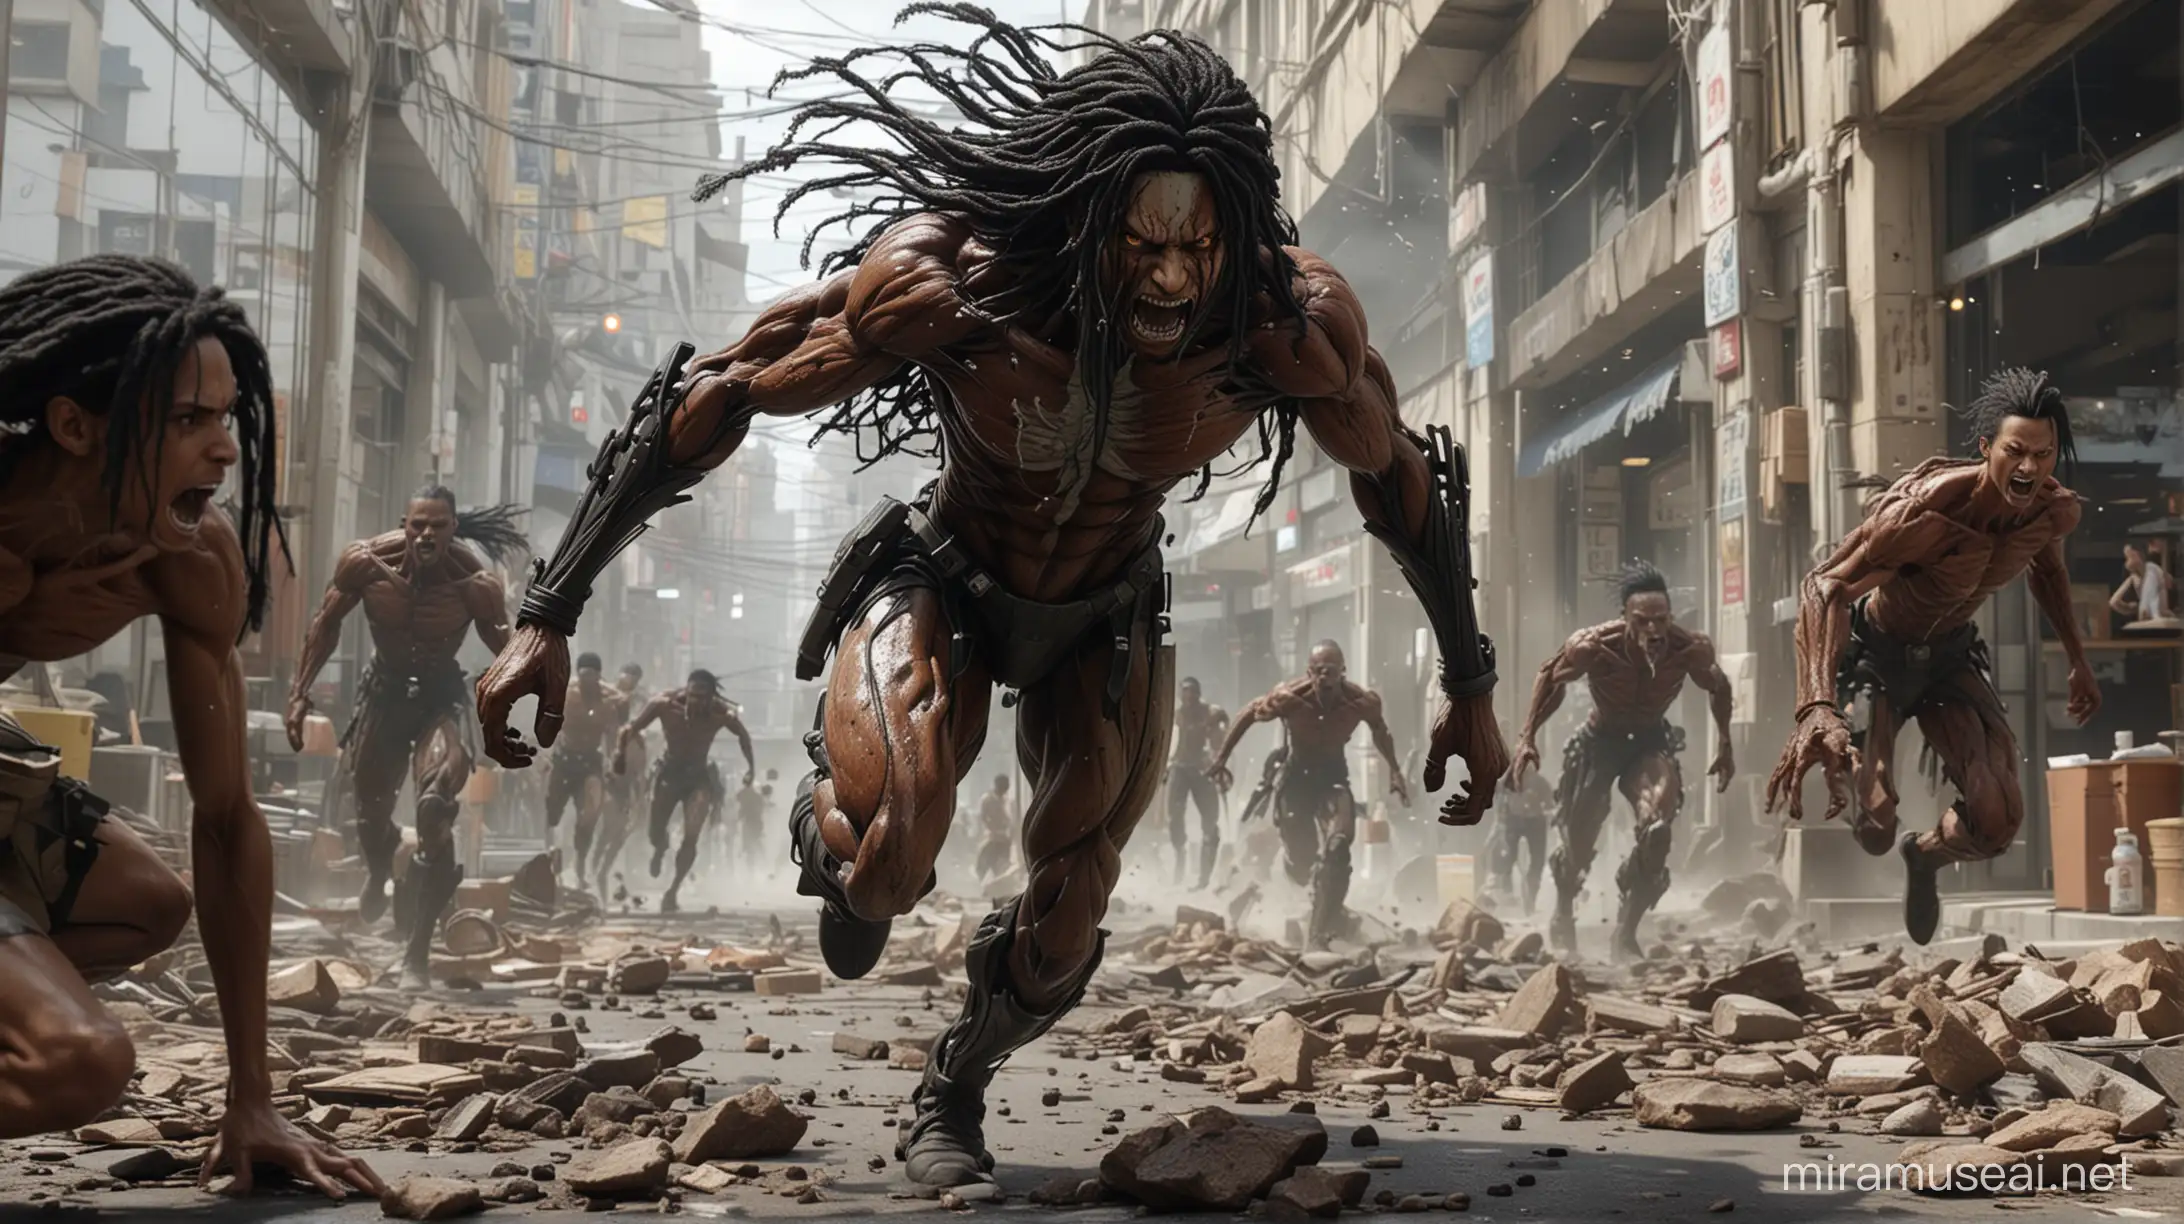 Photographic, extremely high quality high detail RAW photo, colossal black Attack Titan with black dreadlocks, sprinting through a cafeteria, debris flying, panicked civilians, dynamic action, powerful muscular anatomy detail, cinematic destruction, perspective from street level looking up, 4K resolution, by Hajime Isayama and Michael Bay